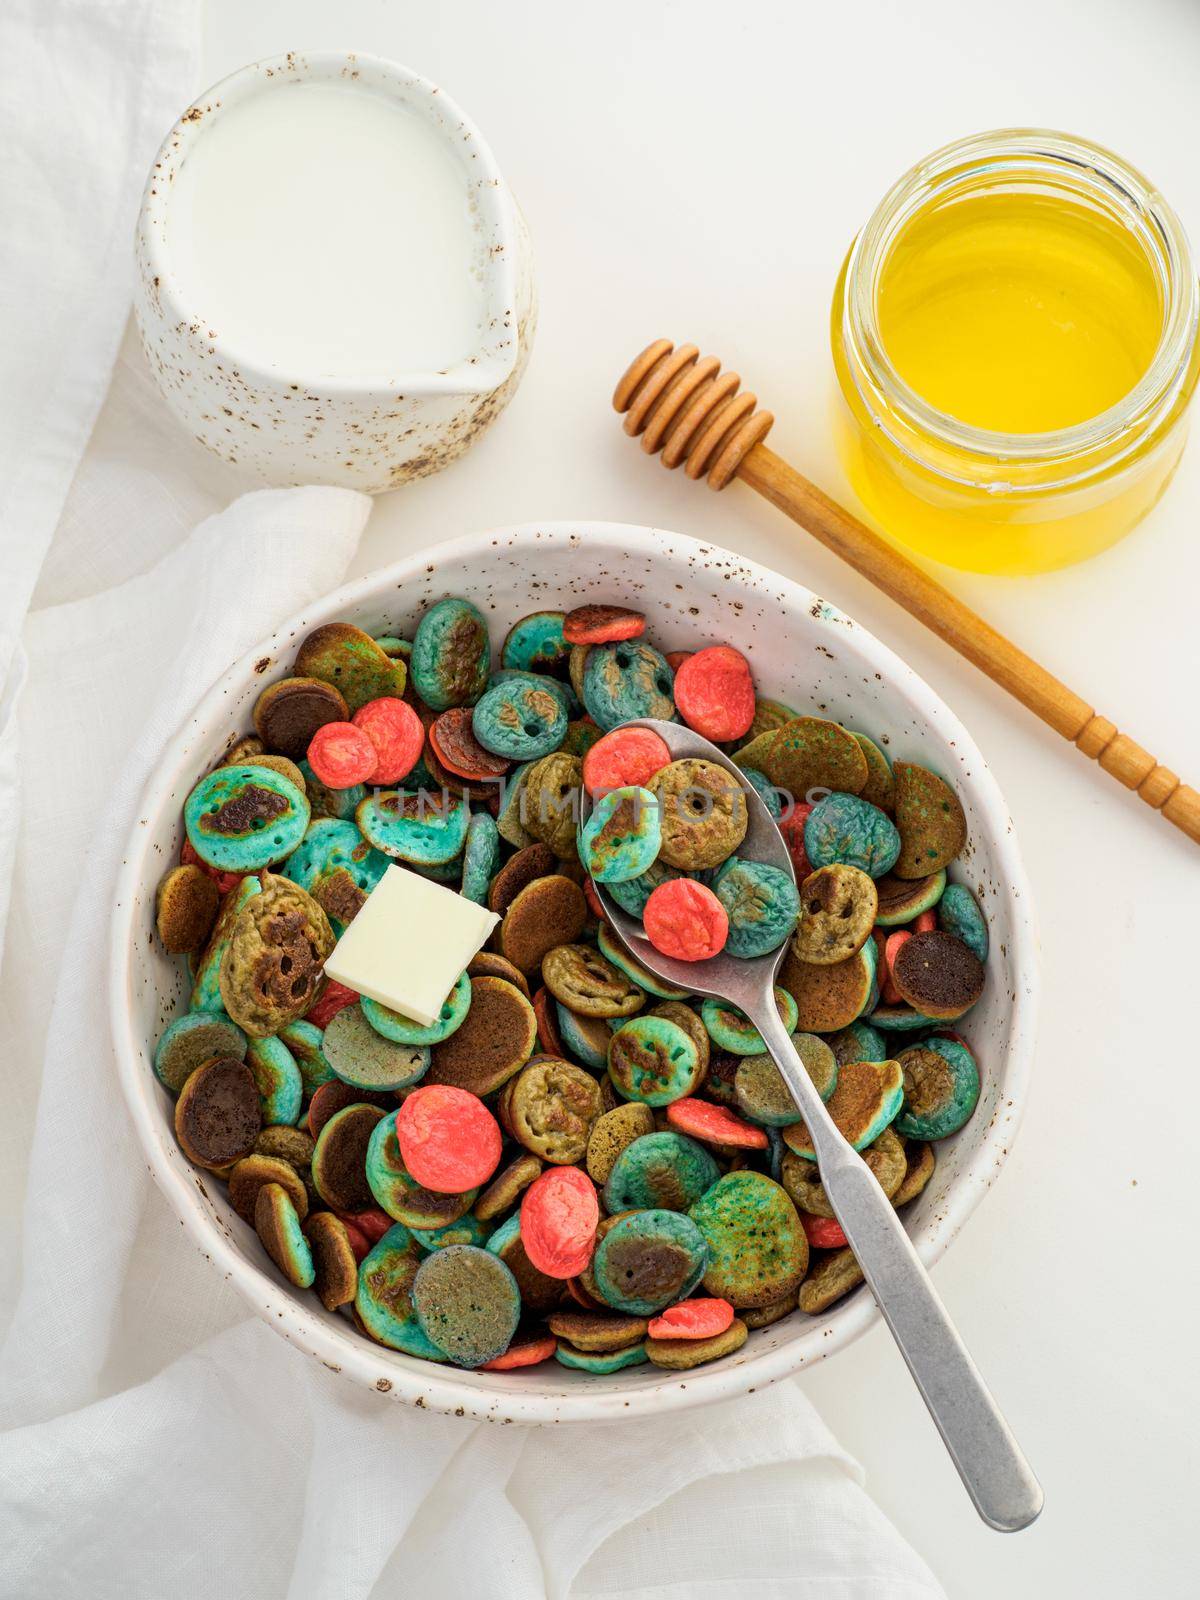 Trendy food - pancake cereal. Heap of colorful mini cereal pancakes. Tiny pancakes with natural color - green matcha, turquose spirulina, blue pea, red fragon fruit